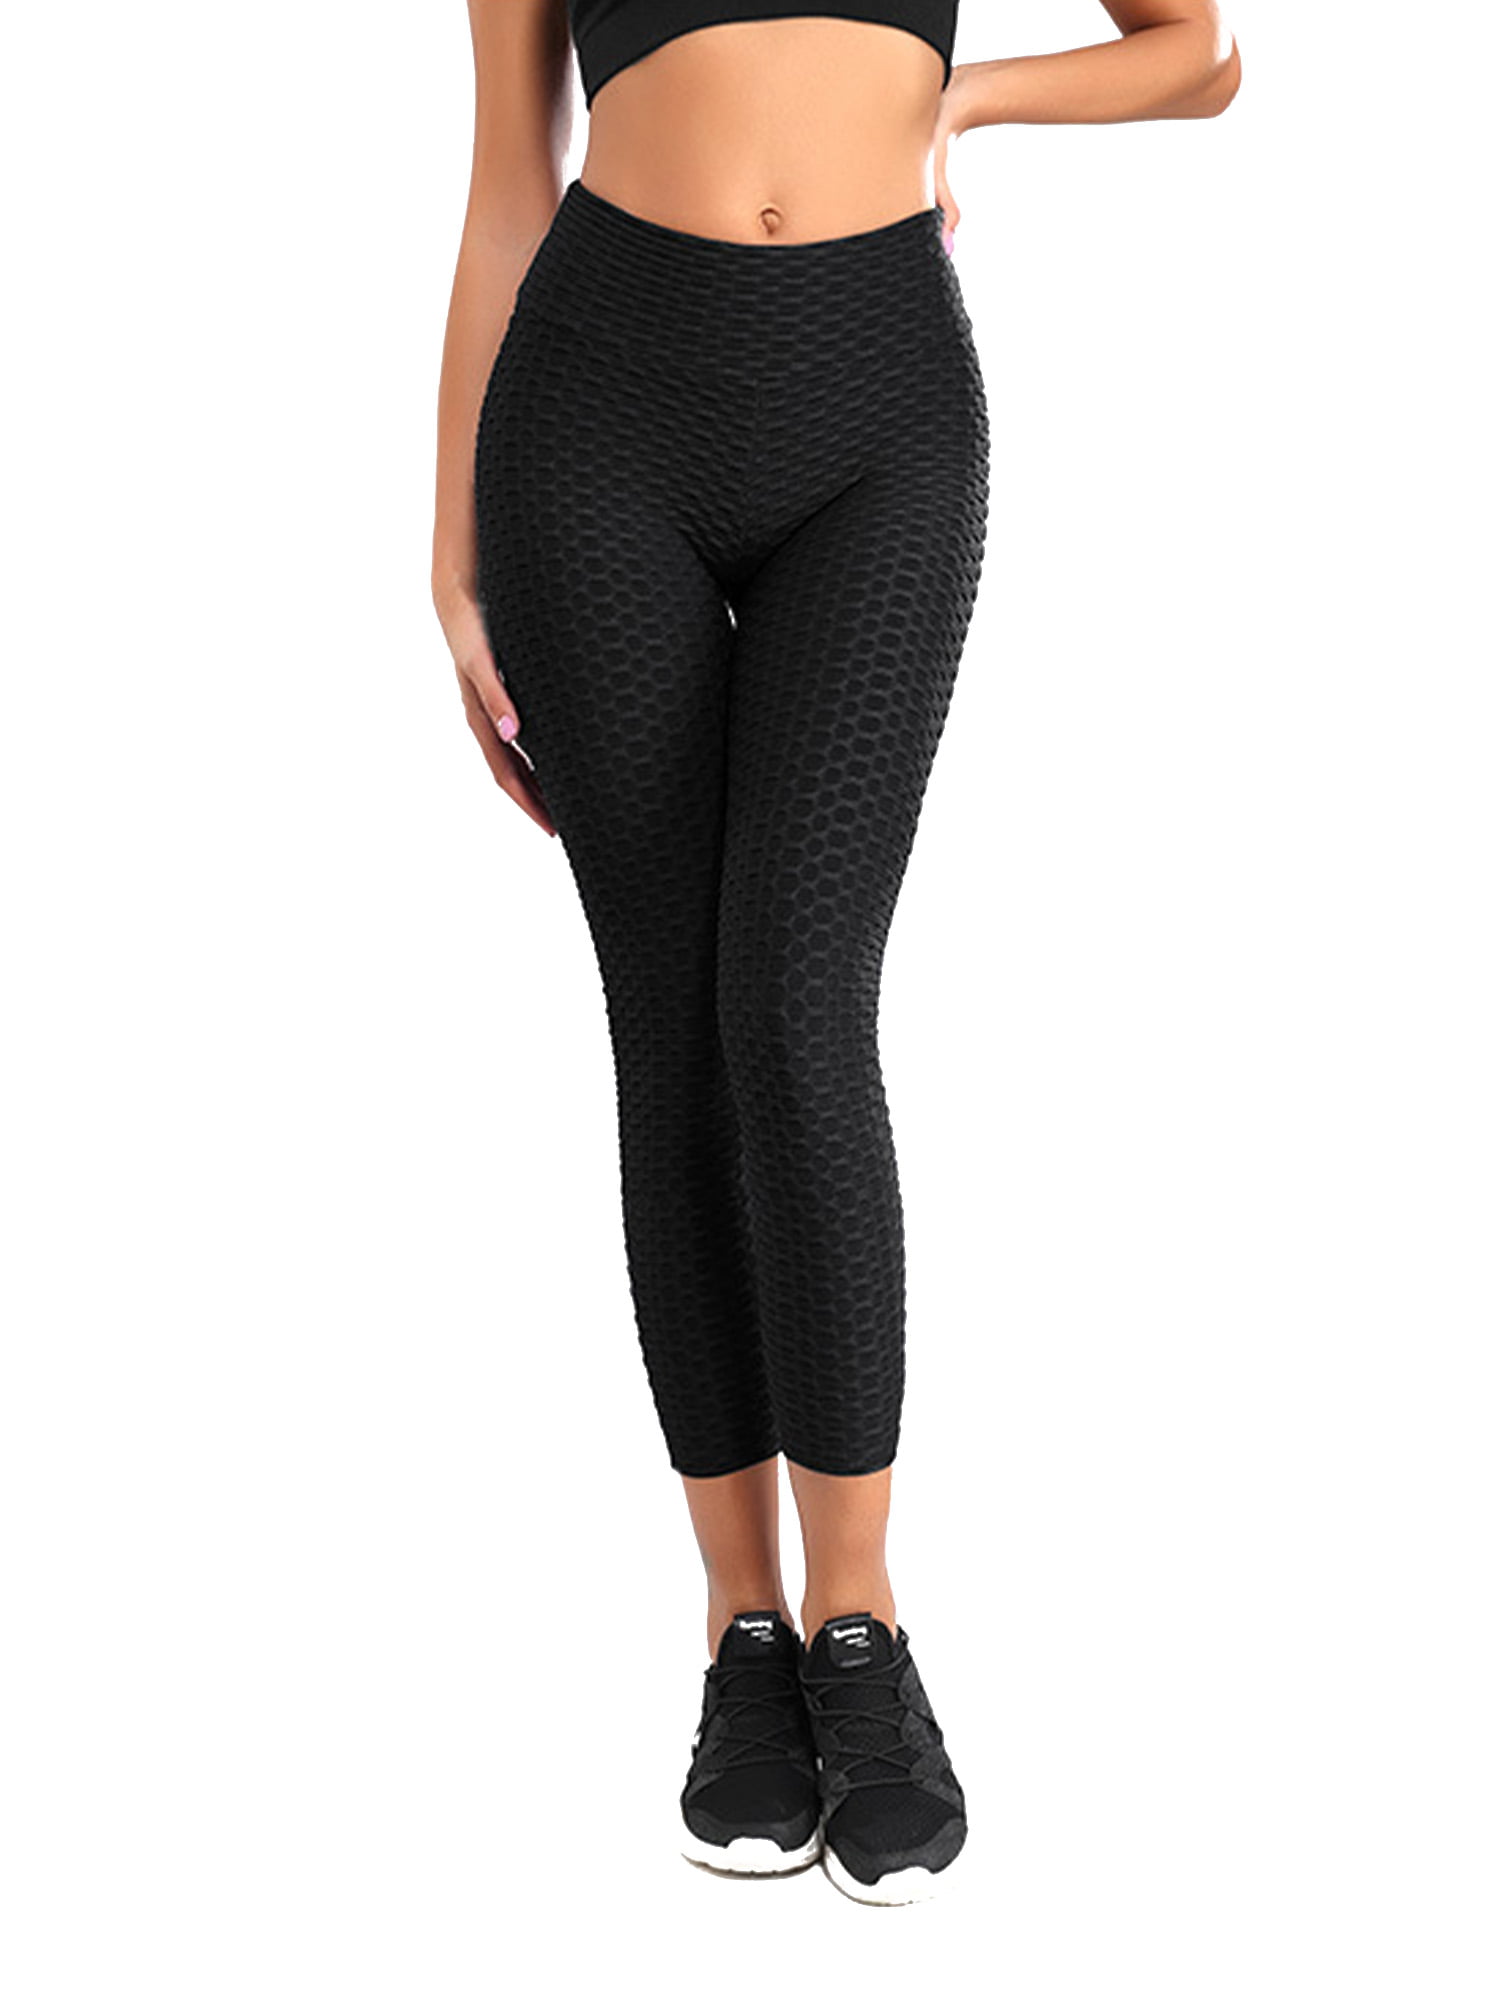 Women Anti-Cellulite Yoga Pants High Waist Leggings Push Up Ruched Trousers Gym 